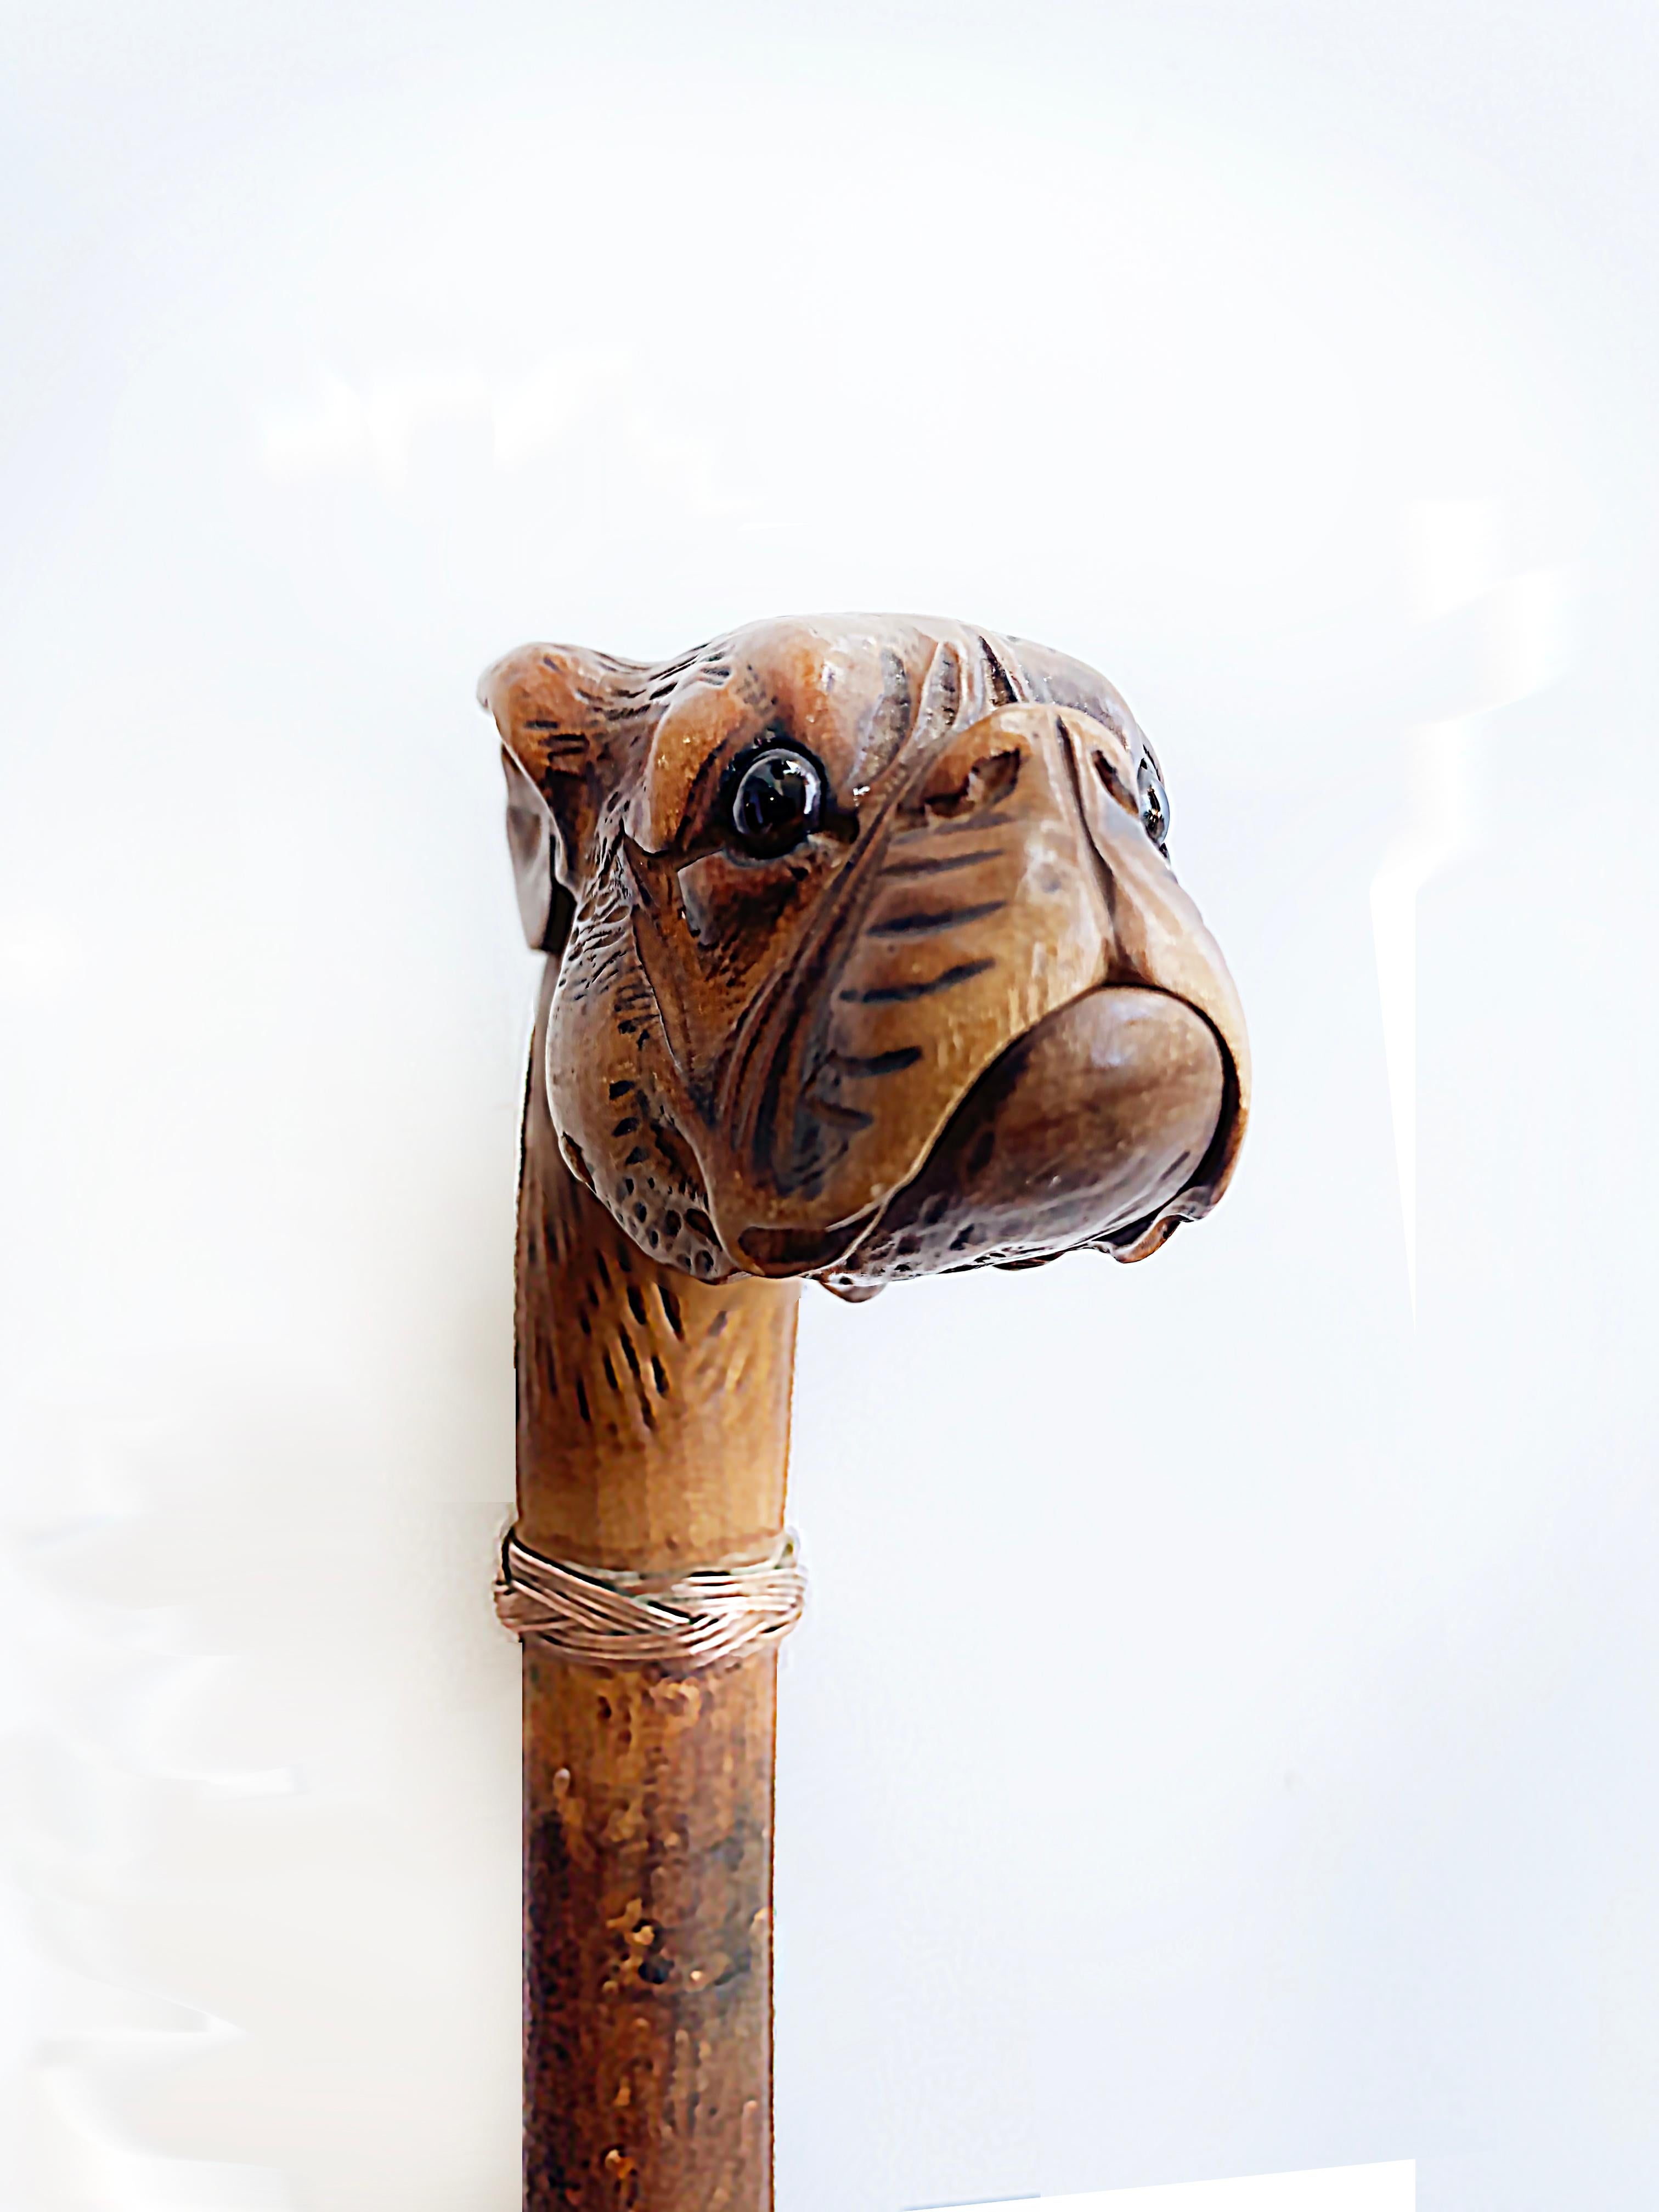 Antique Pug French bull-dog glove holder walking stick cane

Offered for sale is an Antique 19th-century carved hardwood glove holder walking stick. The hand-carved French Bulldog head or a pug dog walking stick has glass eyes. This cane has a